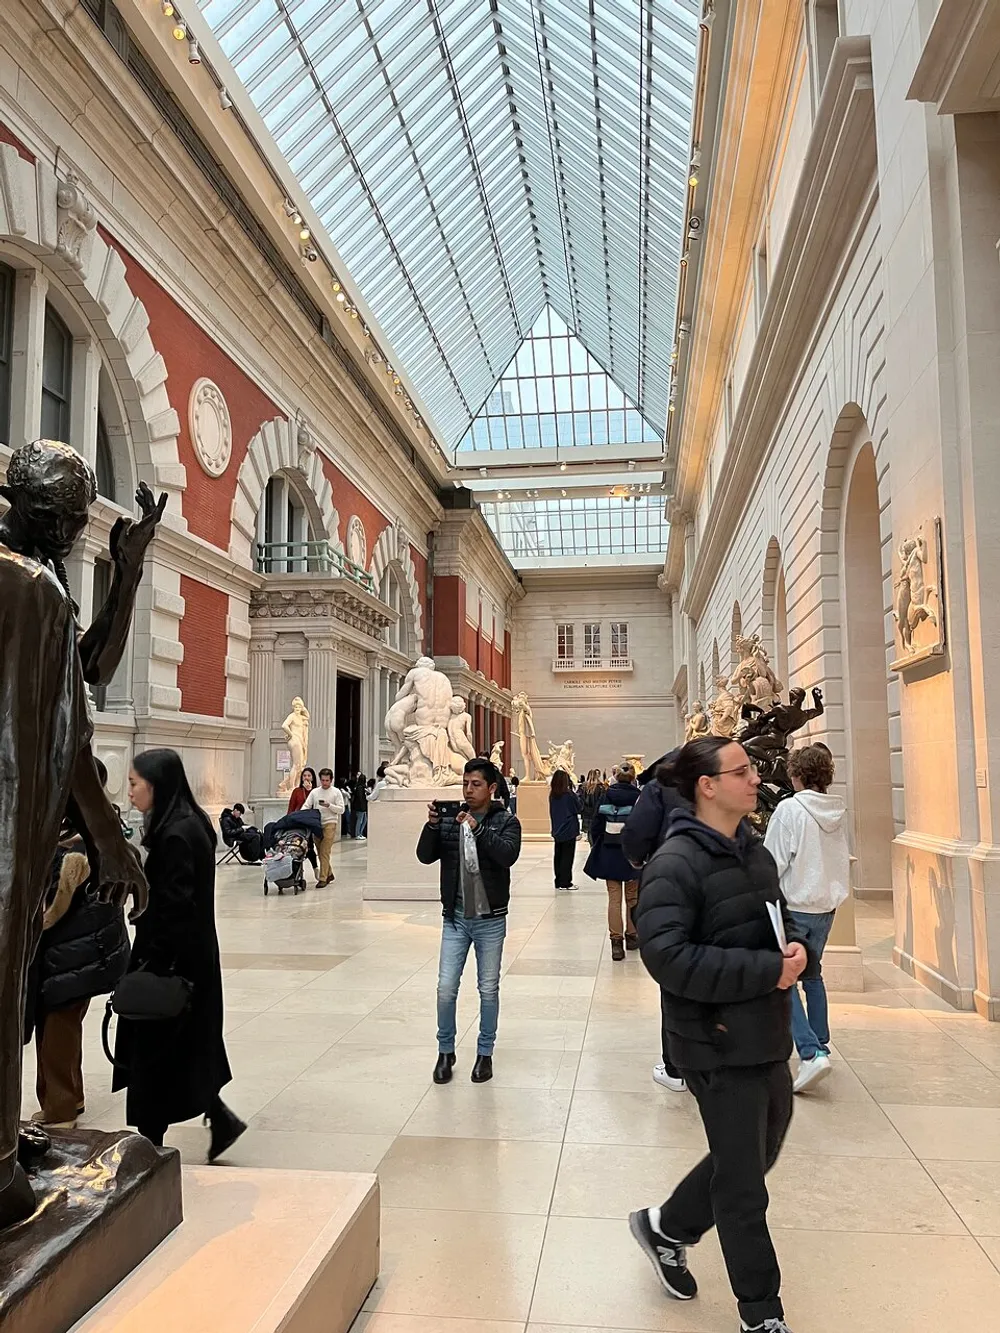 Visitors are walking through a grand hall with classical sculptures and a glass ceiling in an art museum